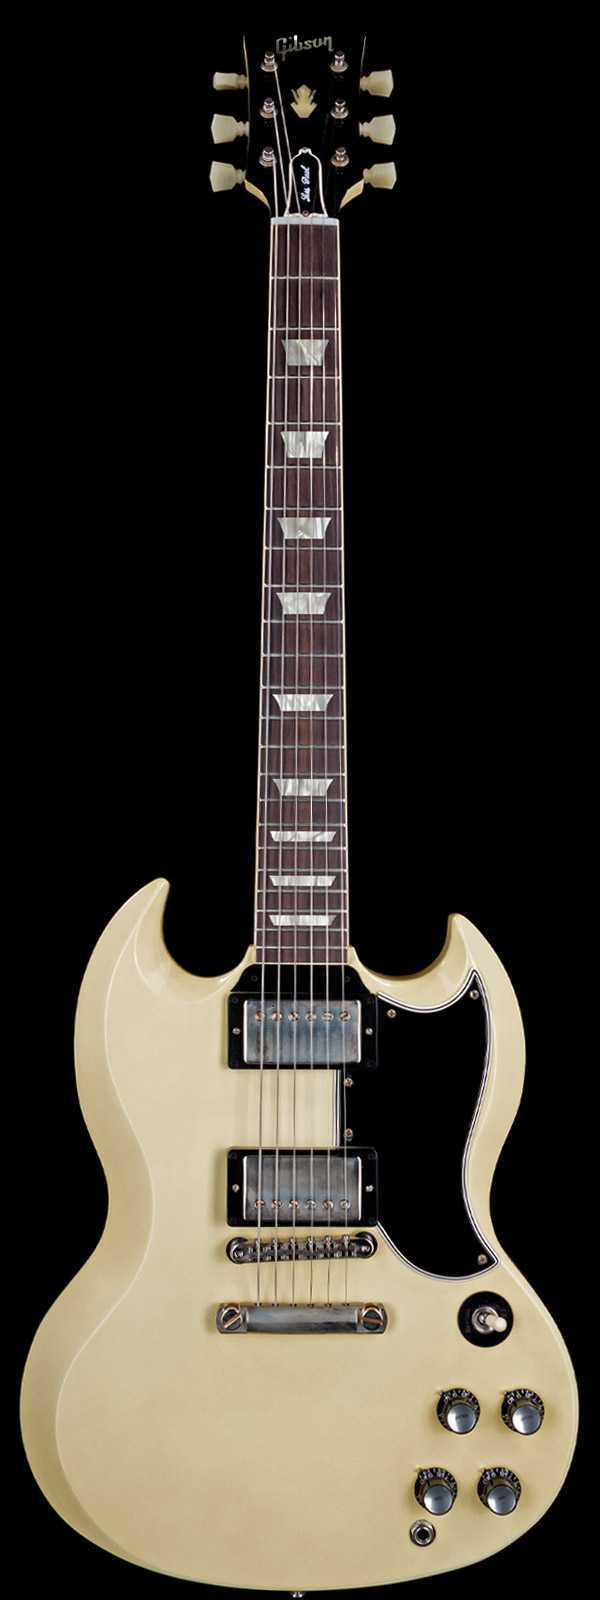 Gibson Custom Shop Made 2 Measure 1961 SG Standard Classic White Stop Bar VOS NH